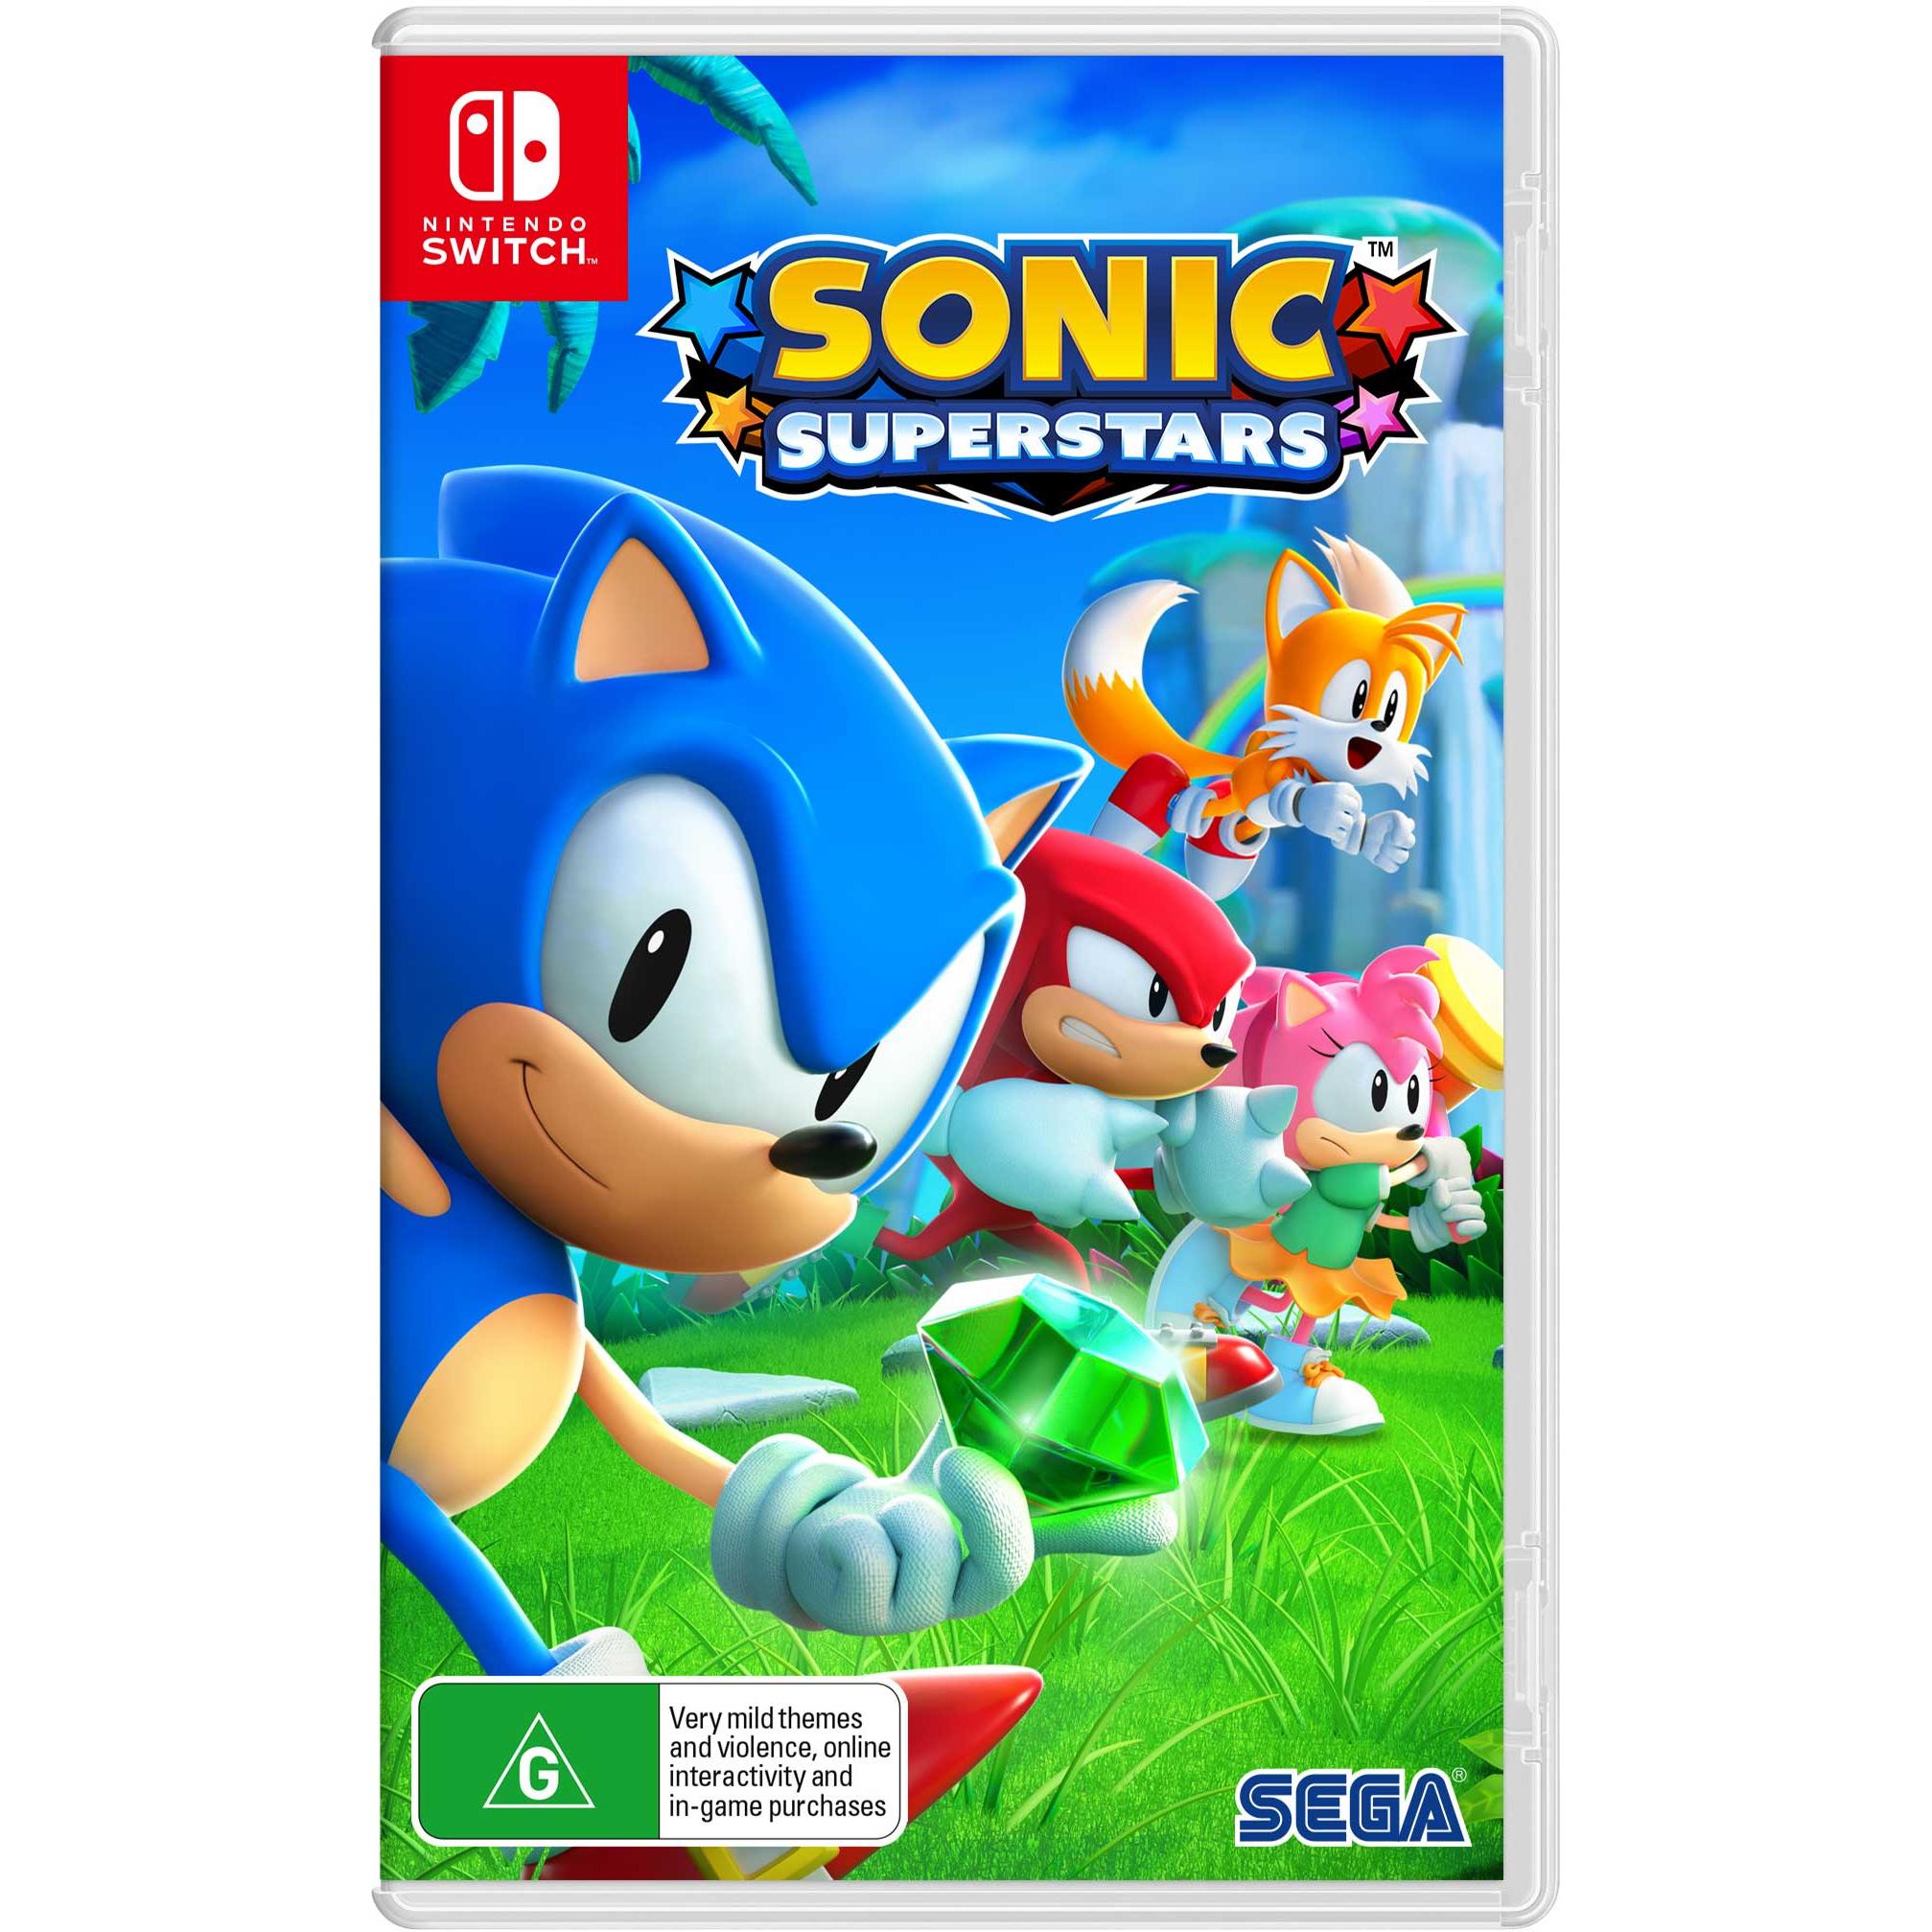 Sonic the Hedgehog 2 for Nintendo Switch adds new features to the